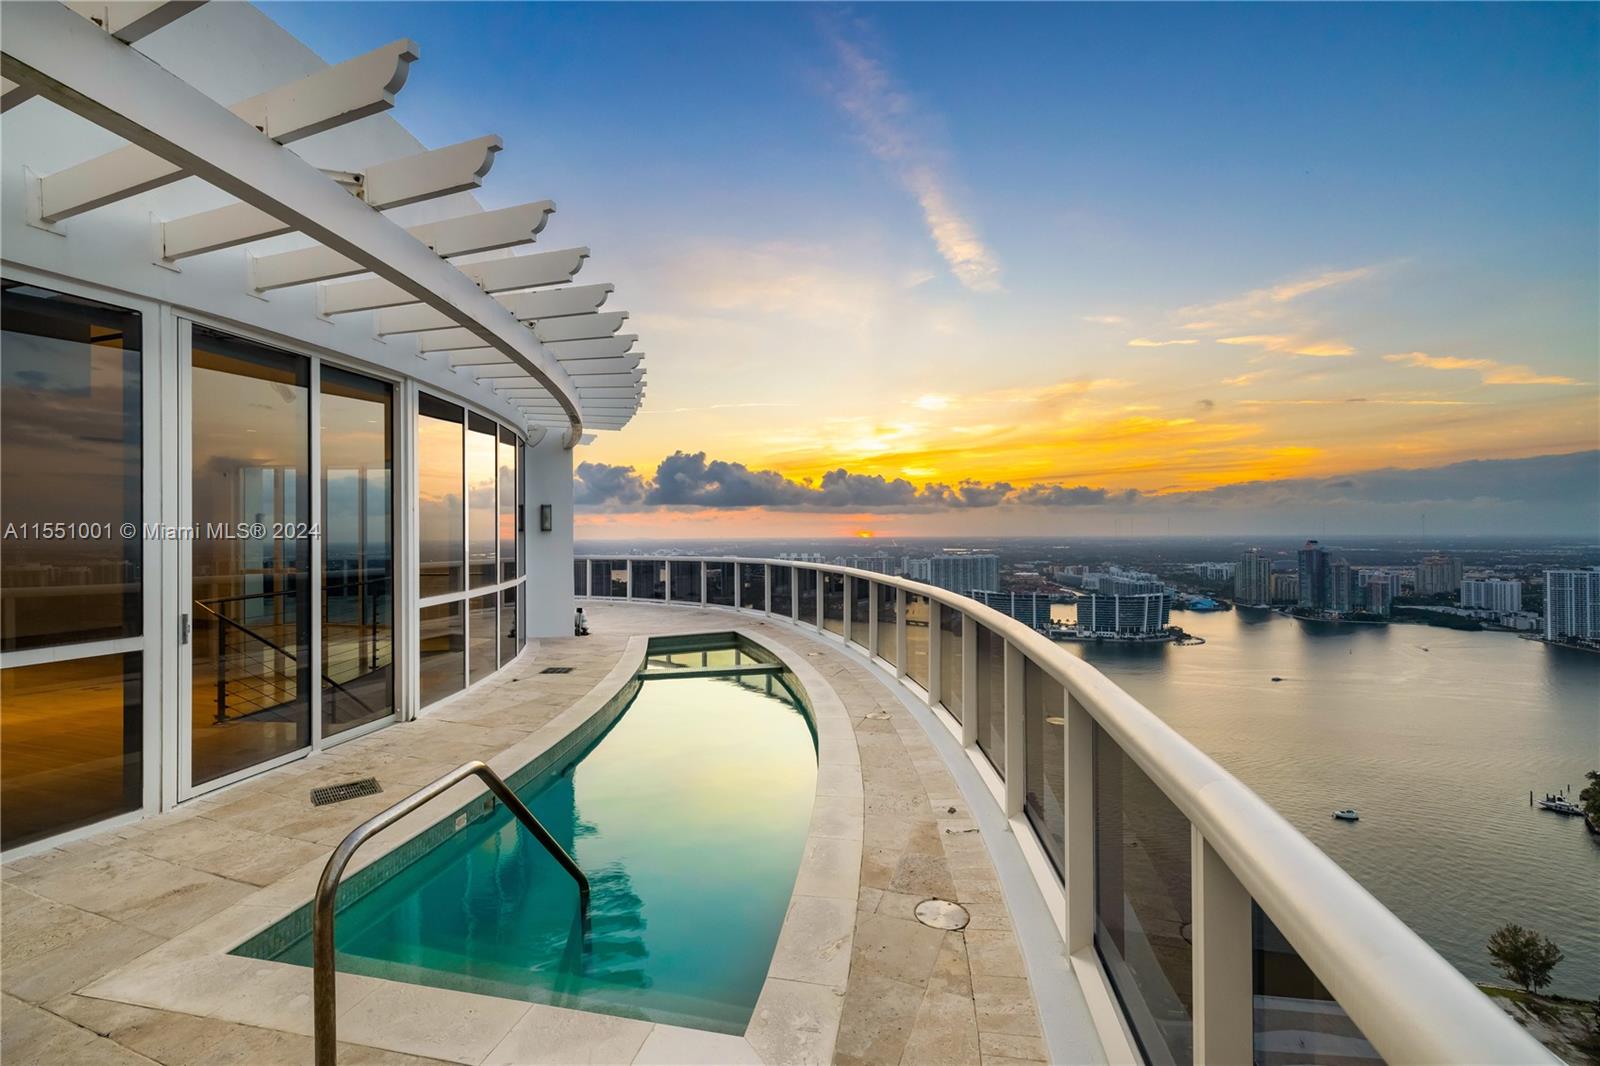 Fully remodeled PH on the 55th floor, boasting a magnificent living room w/ 22 ft ceiling, 2 meticulously crafted floors, & an elevator for effortless access, this residence offers 5,727sf of interior space & 1,500sf outdoor terrace. Private pool & jacuzzi w/ stunning views of the Ocean & skyline. All 6 beds w/ floor-to-ceiling windows & panoramic views, 2 state-of-the-art kitchens by Poliform, & high-end fixtures, marble countertops, & Wolf-Subzero appliances. Elegant vanities sourced from Florence, a wine cellar for over 1,000 bottles & full home automation adds modern convenience to the home's refinement. This building offers guard-gated entry, multiple pools, gourmet restaurants, state-of-the-art gym, comp valet parking for your guests & exclusive beach services.